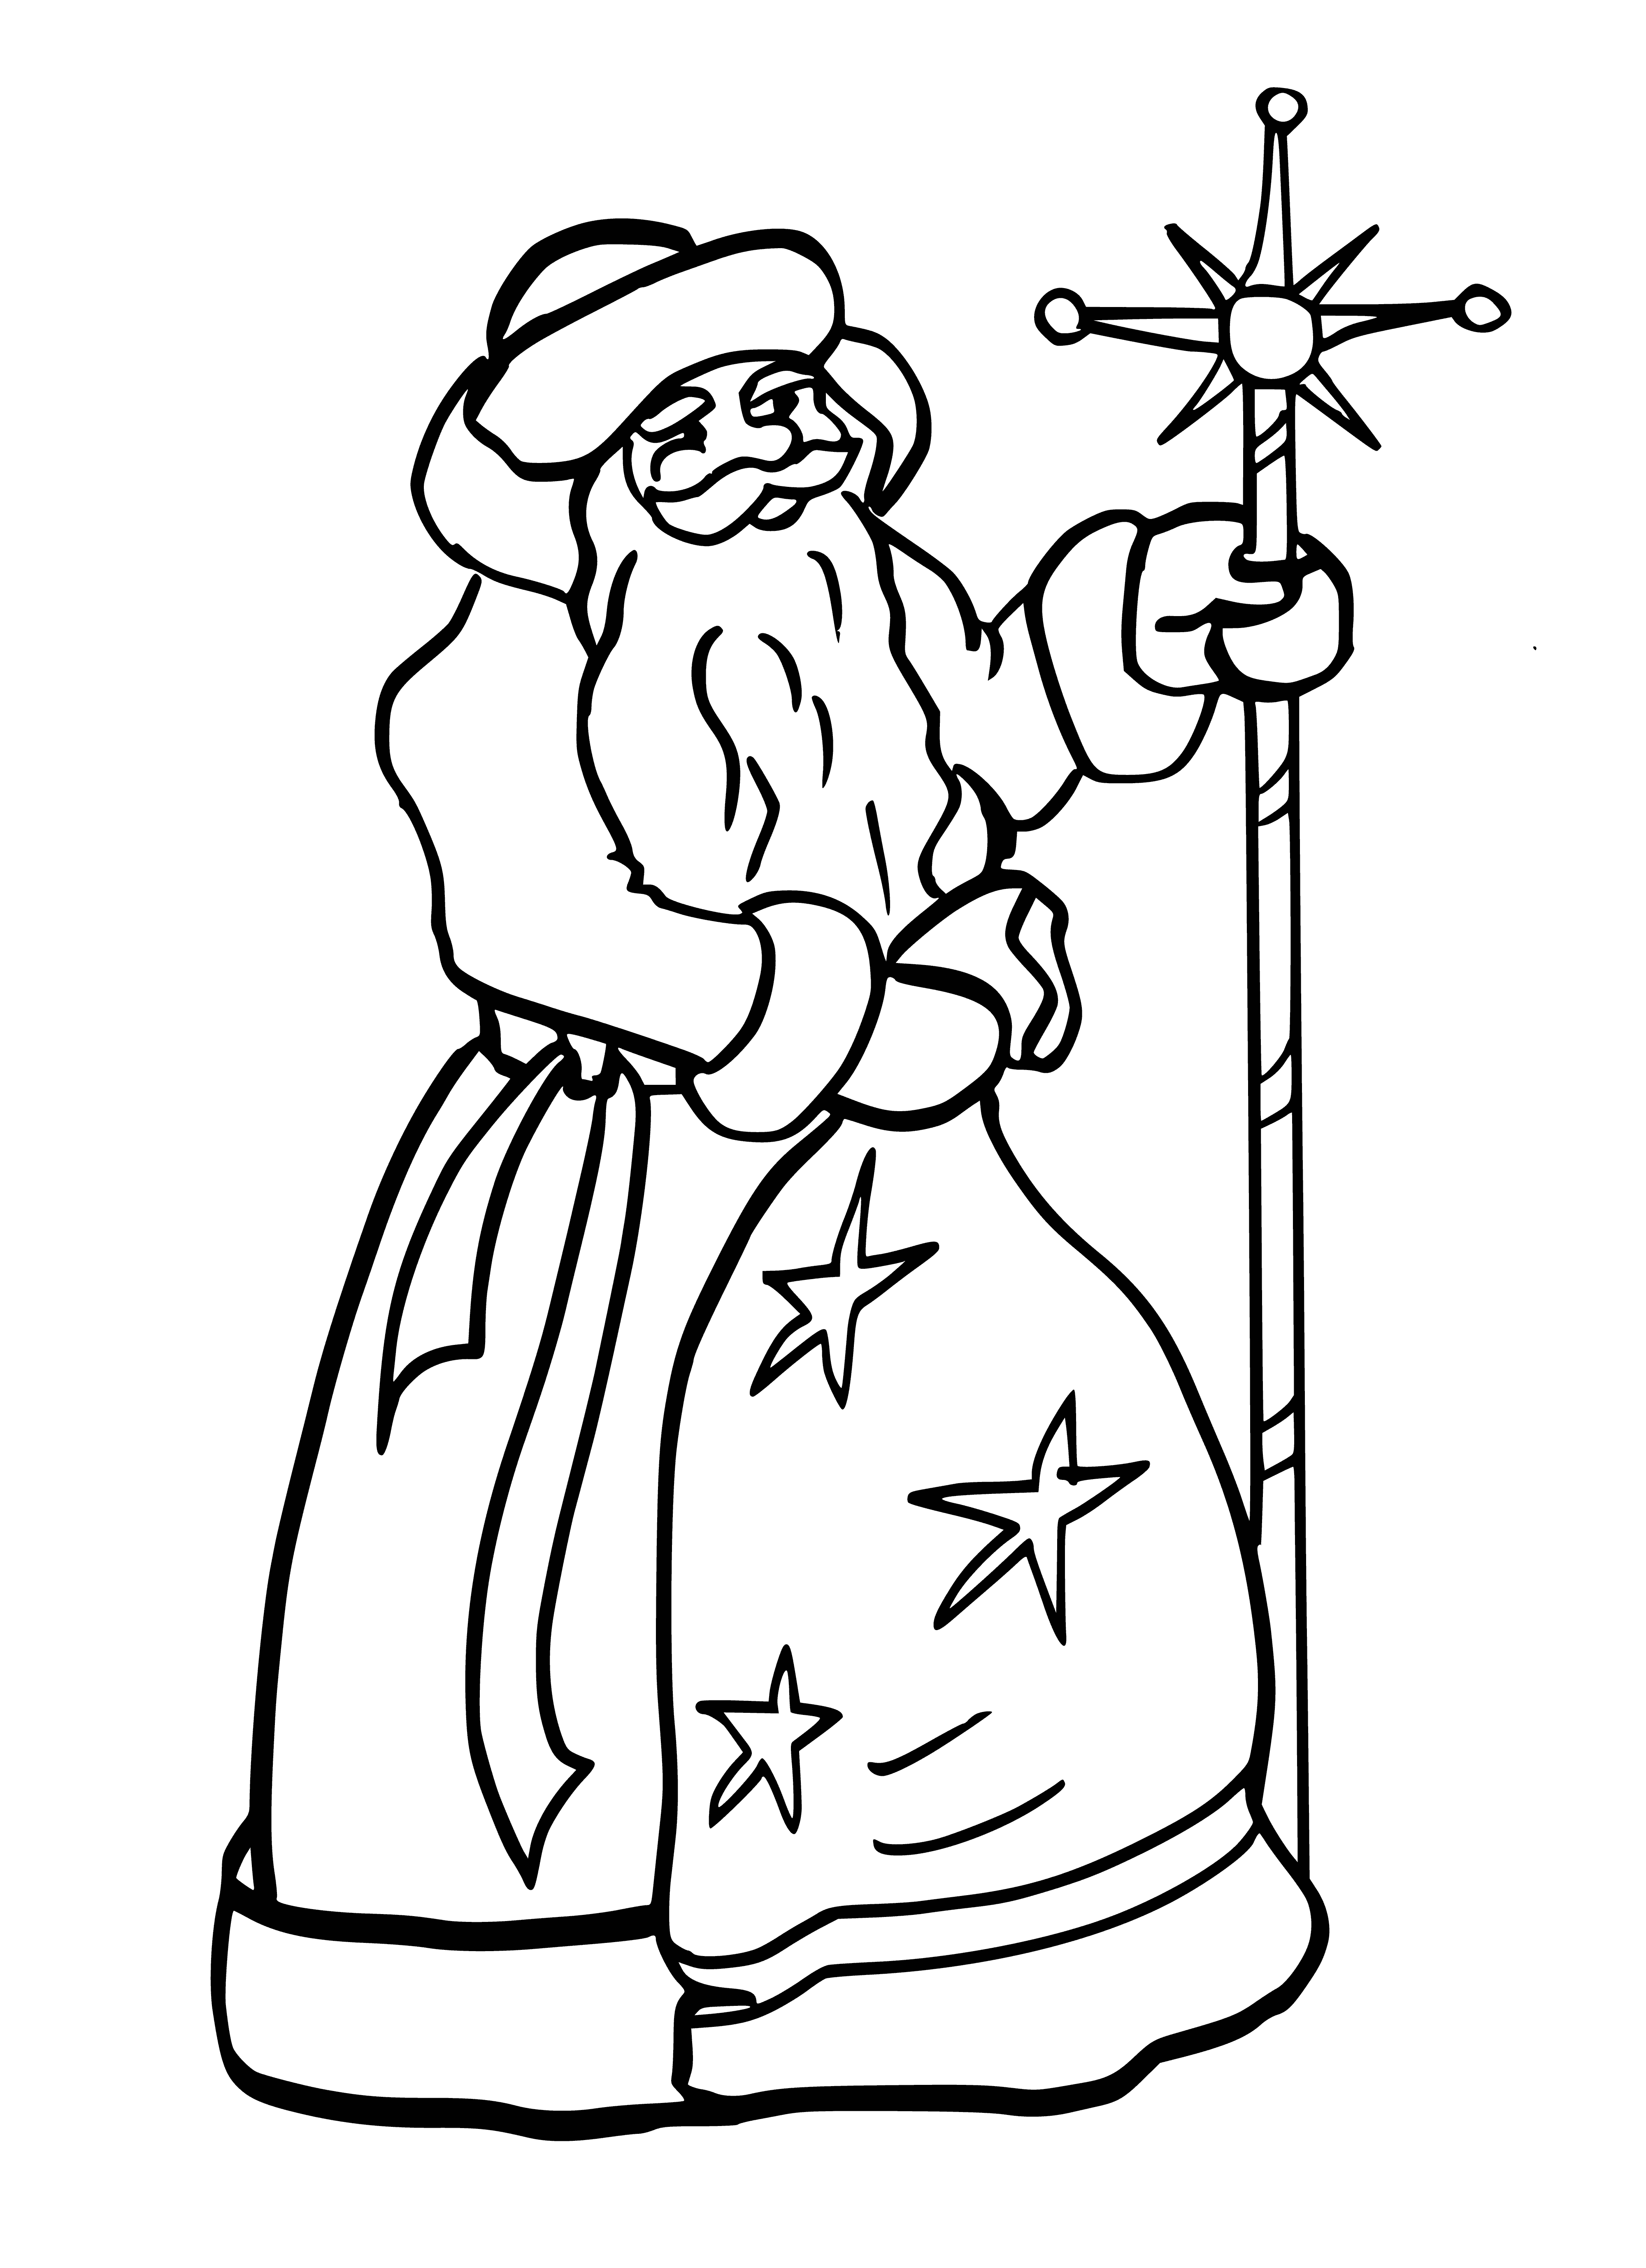 coloring page: Santa Claus is jolly & holding a large bag full of presents in a red coat & hat with white fur trim! #Christmas #ColoringPage